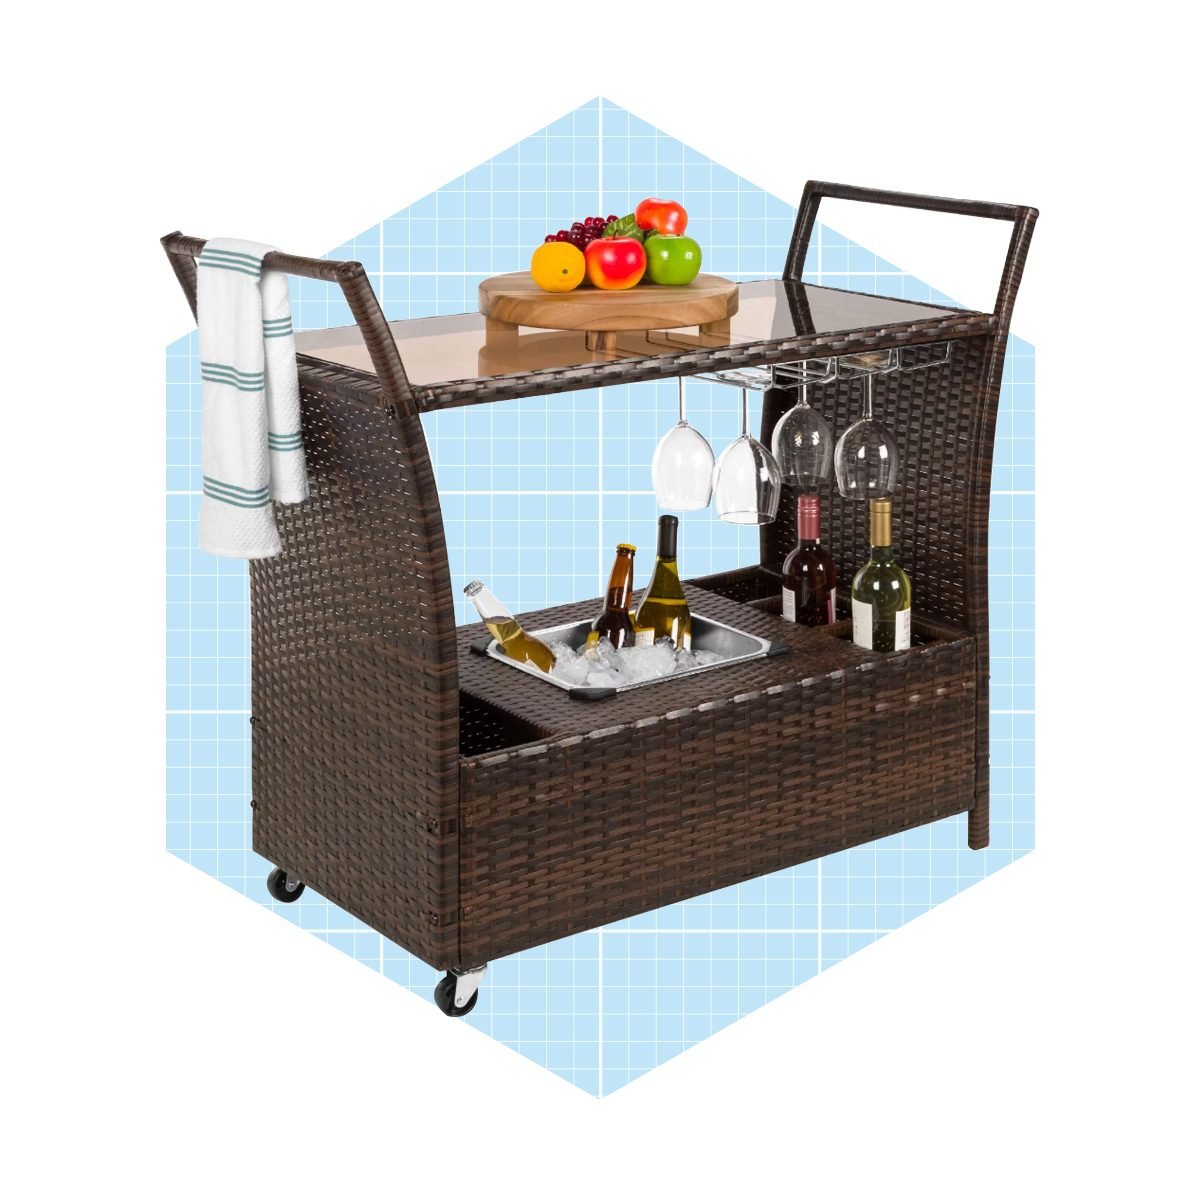 Best Choice Products Wicker Outdoor Rolling Bar Cart With Ice Bucket, Glass Countertop, Glass Holders, And Storage Ecomm Bedbathandbeyond.com